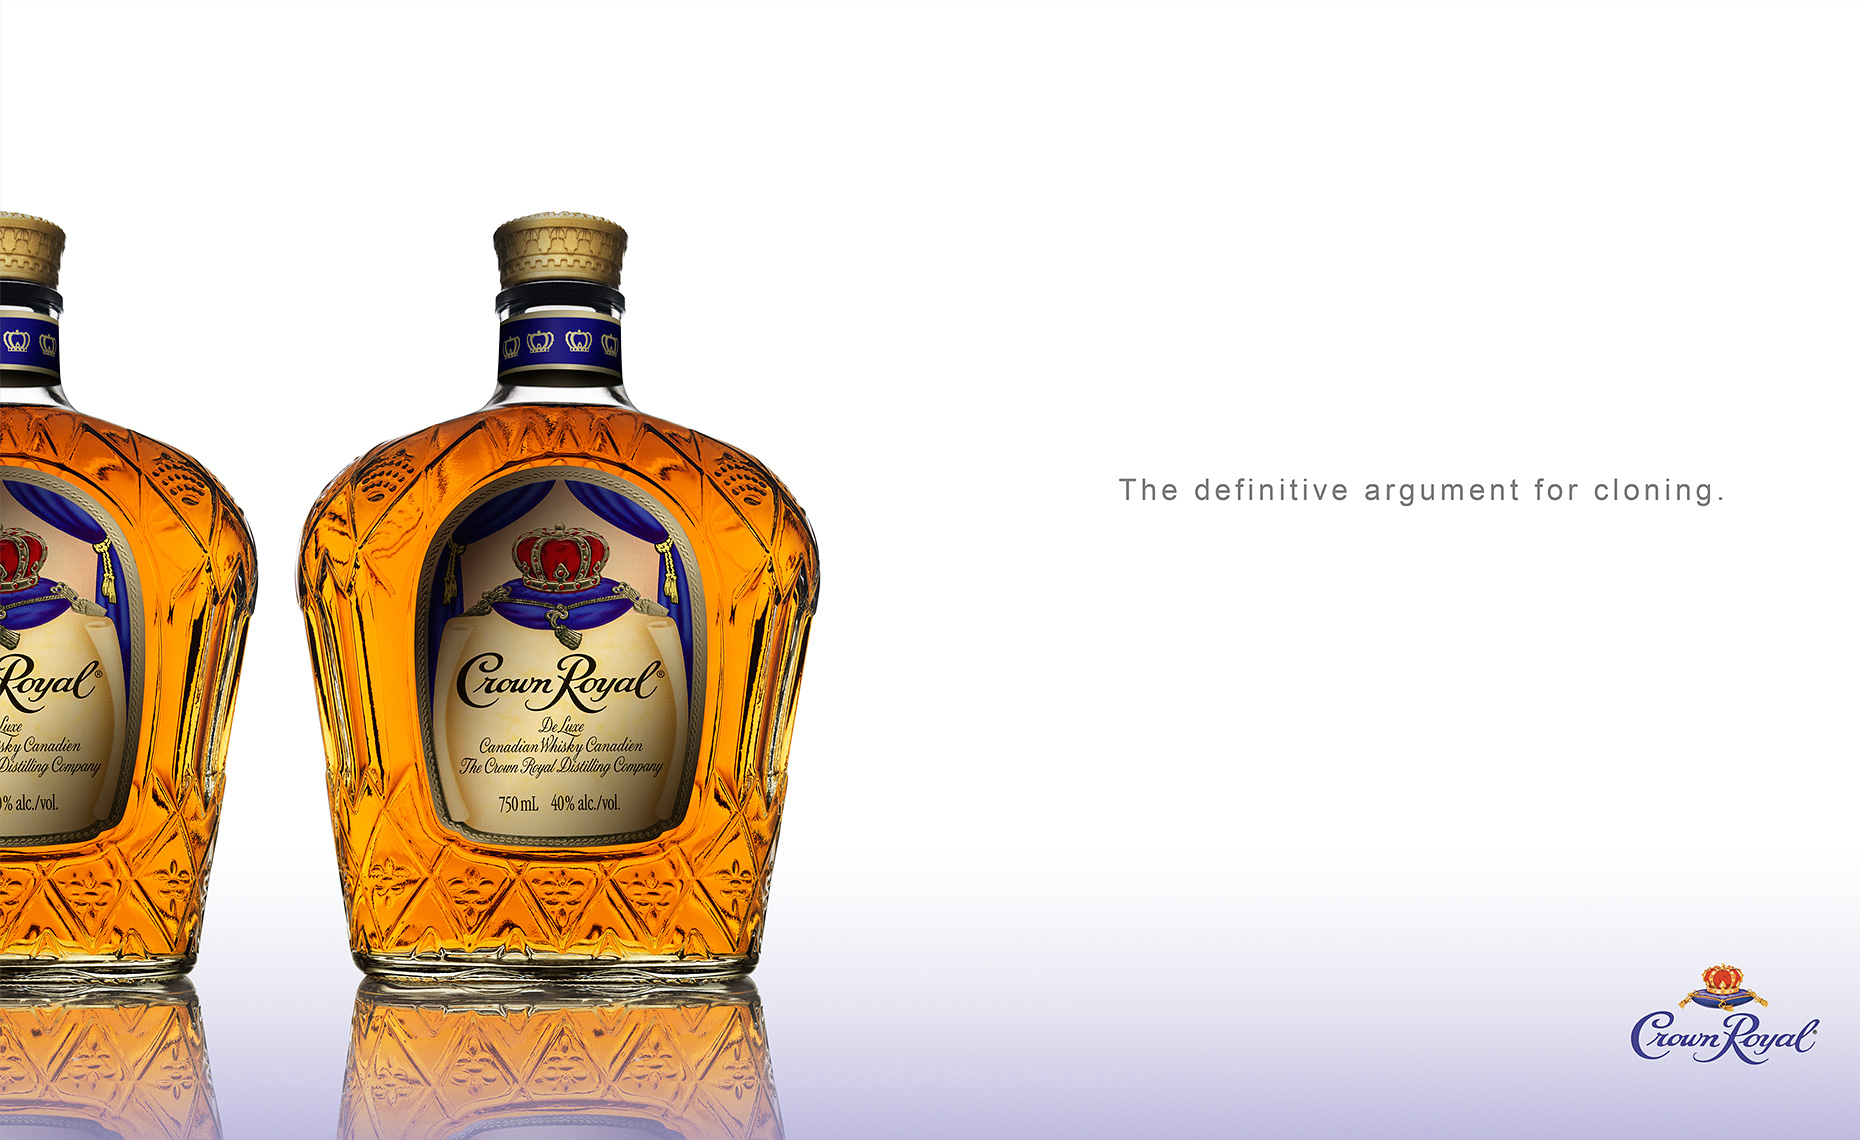 417 Crown Royal Wallpaper Stock Photos HighRes Pictures and Images   Getty Images